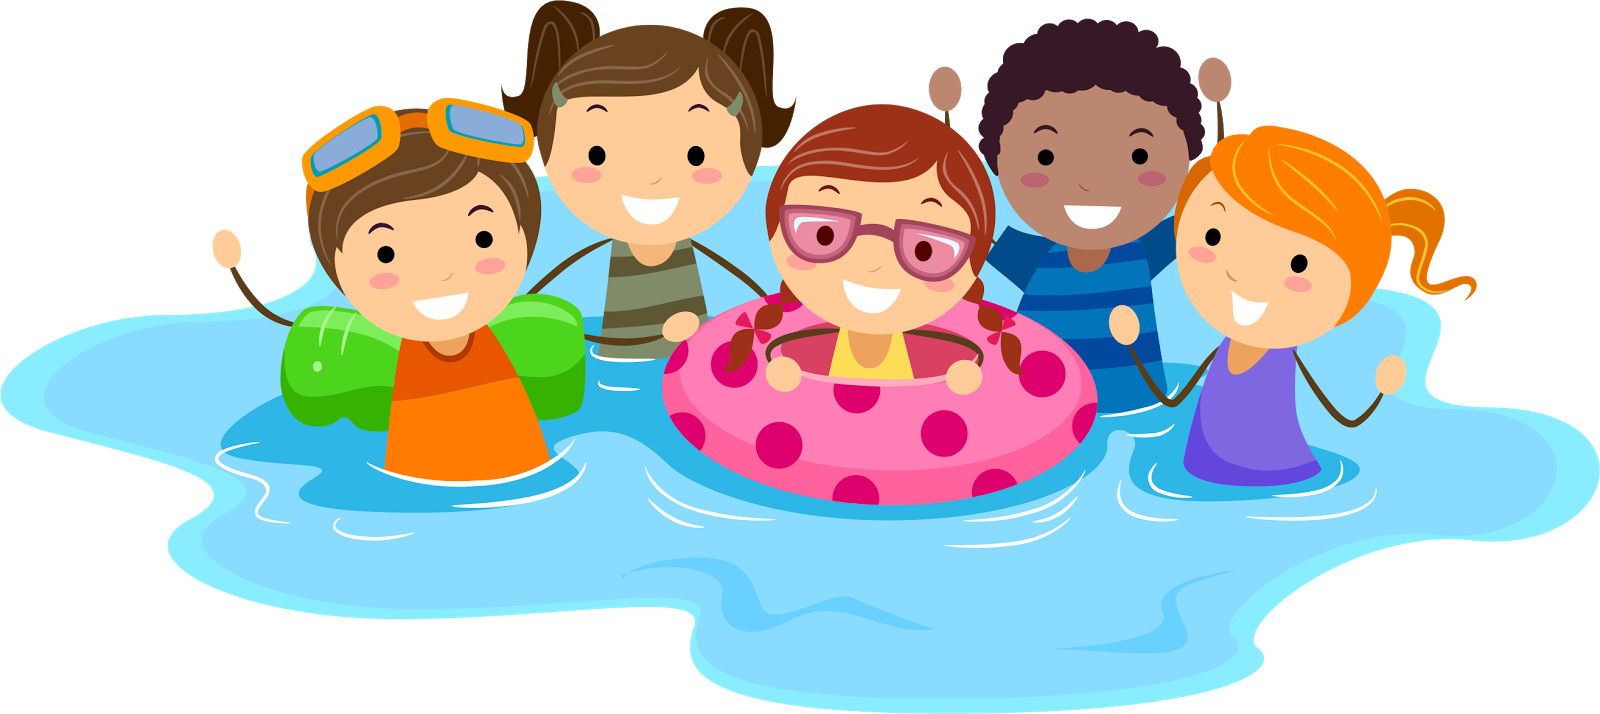 Royalty free clip art. Kid clipart swimming pool